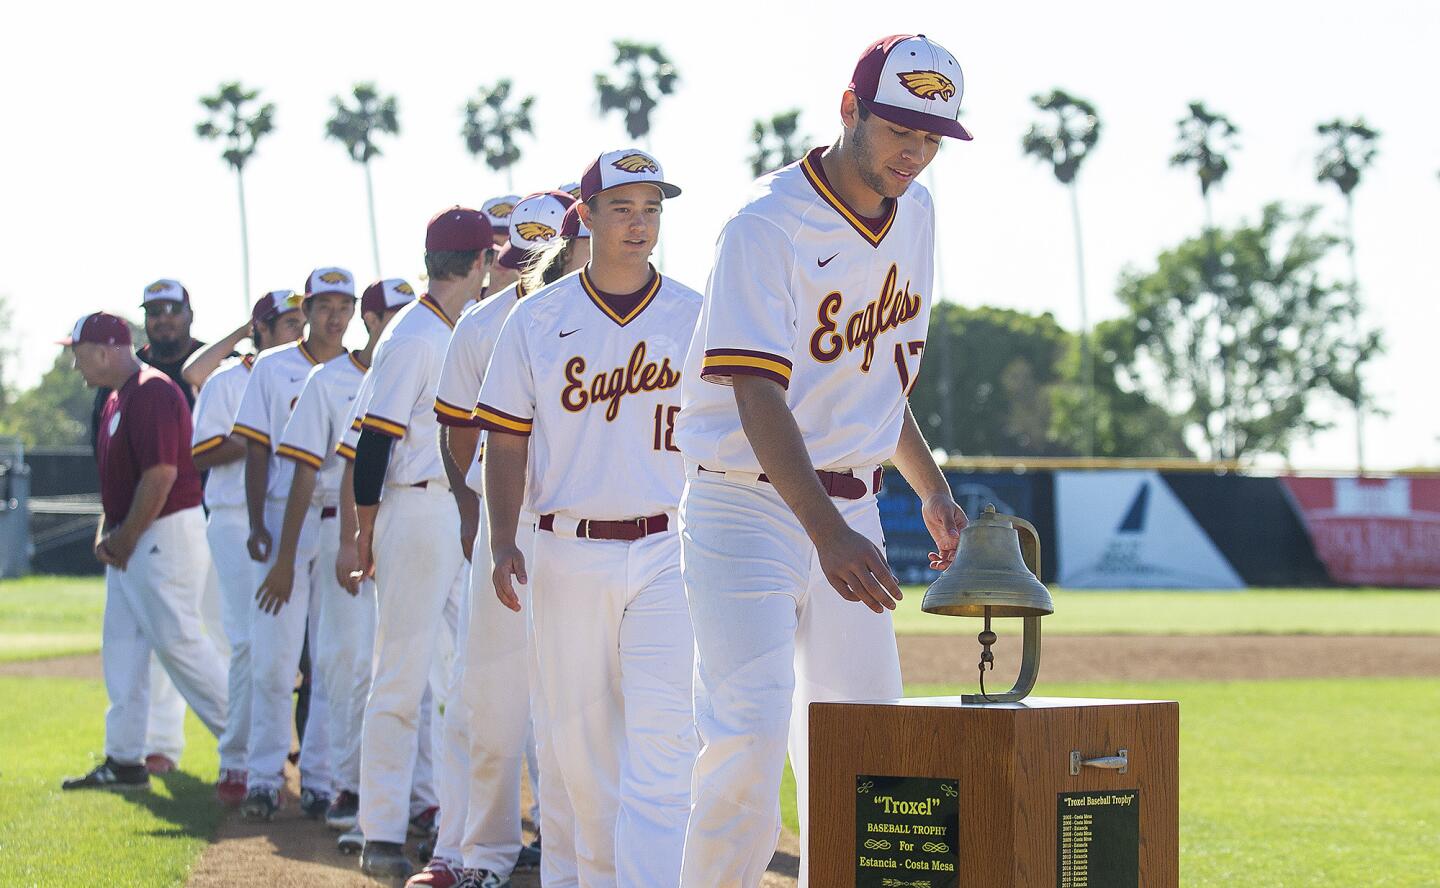 Estancia High's Justin Wood rings the Paul Troxel trophy following a 3-2 win over rival Costa Mesa in an Orange Coast League game at Estancia on Wednesday.